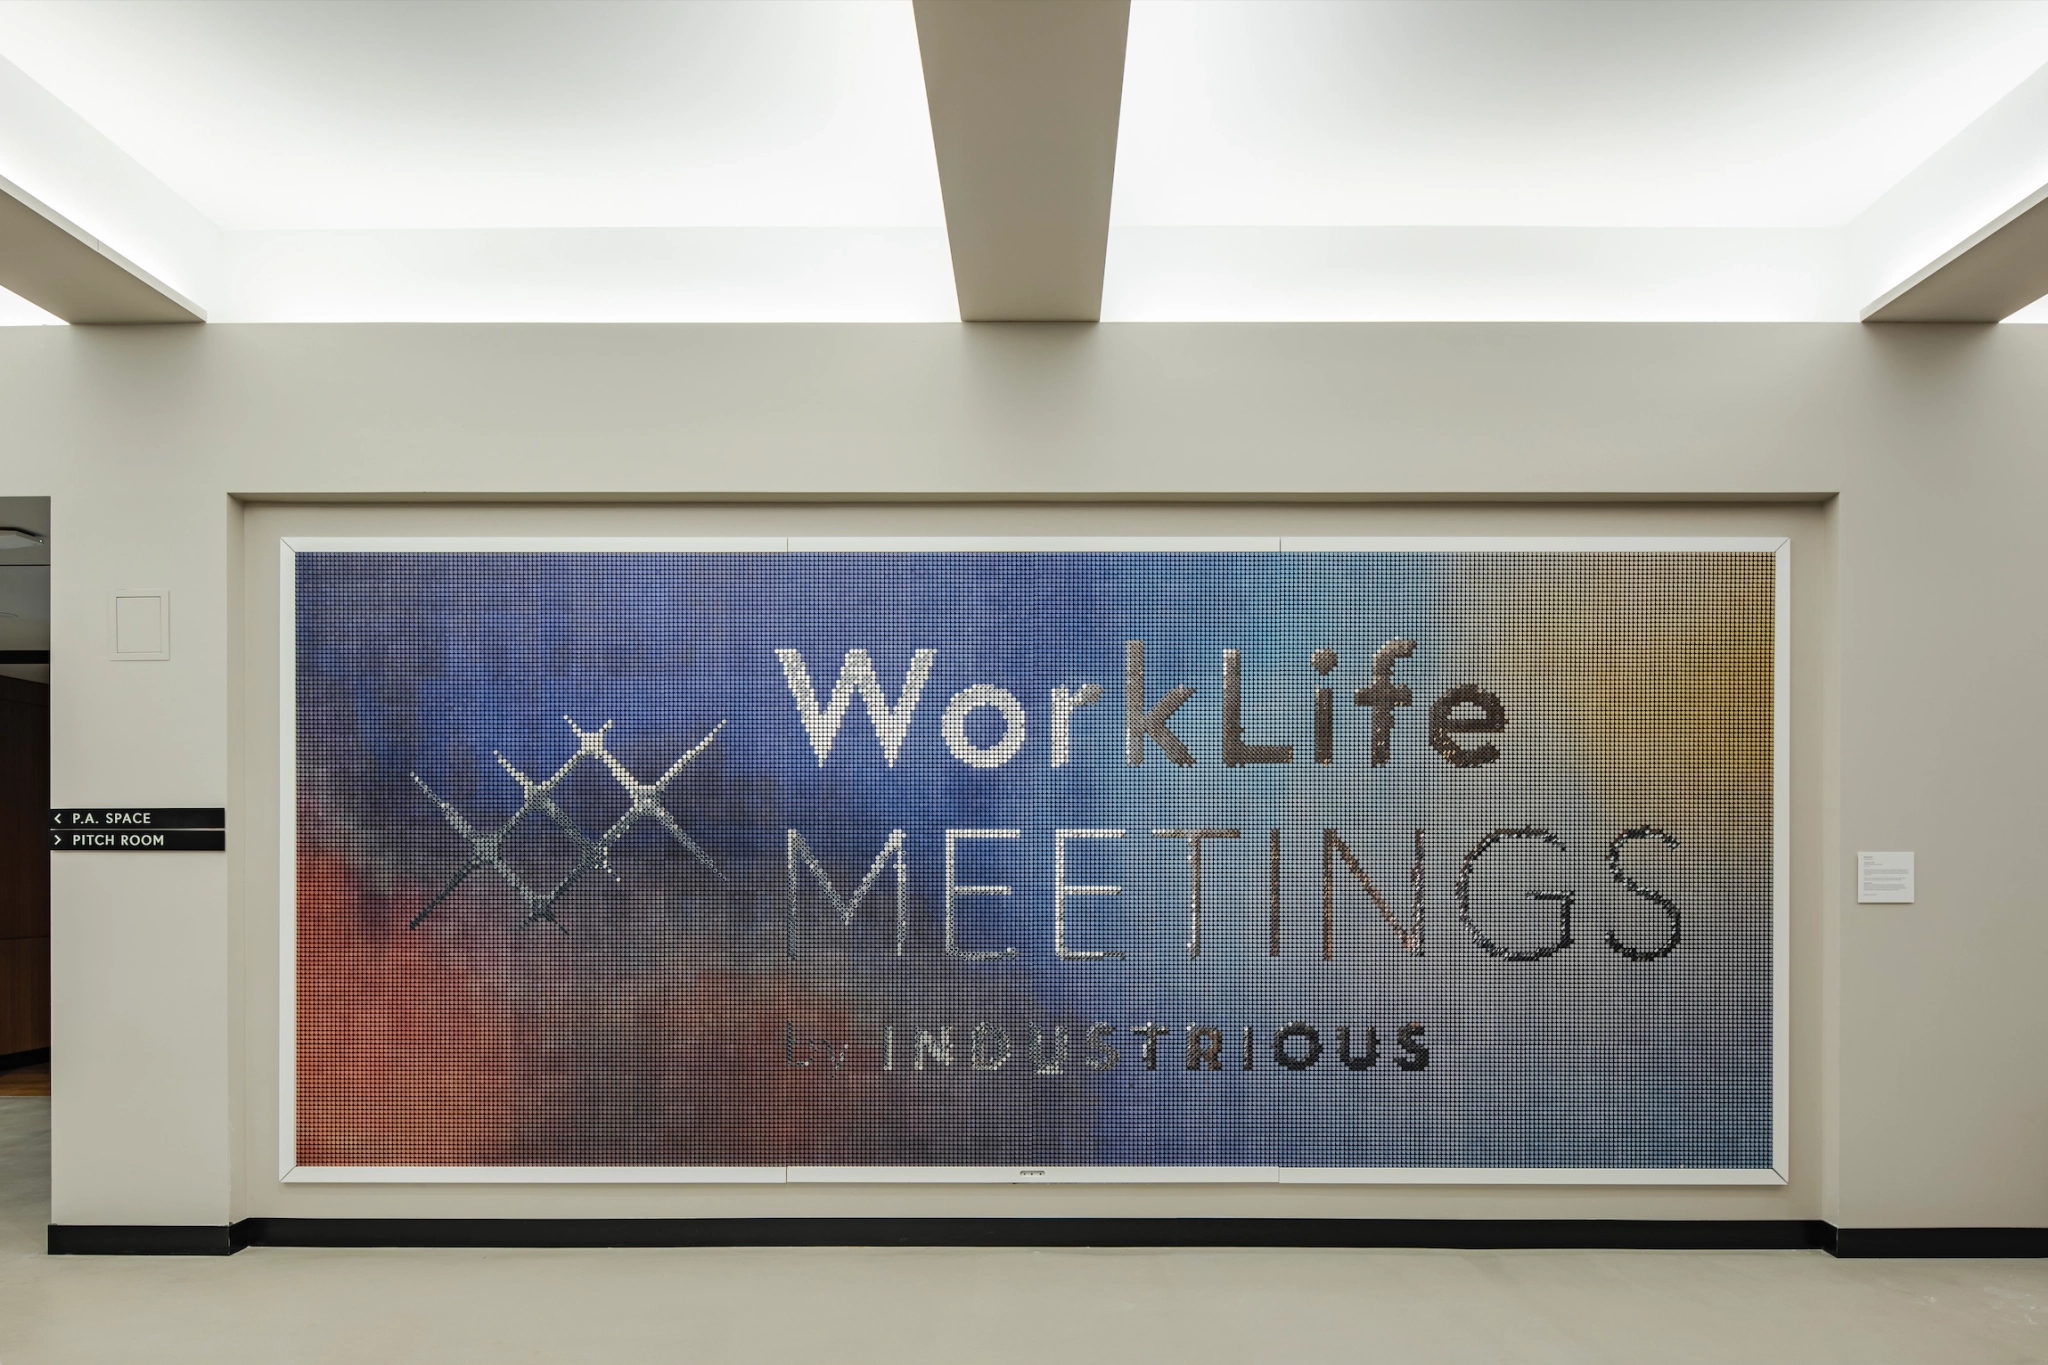 A wall mural in the New York office space displays the text "WorkLife Meetings by Industrious" with abstract colors in the background, enhancing the vibrant atmosphere of the meeting room.